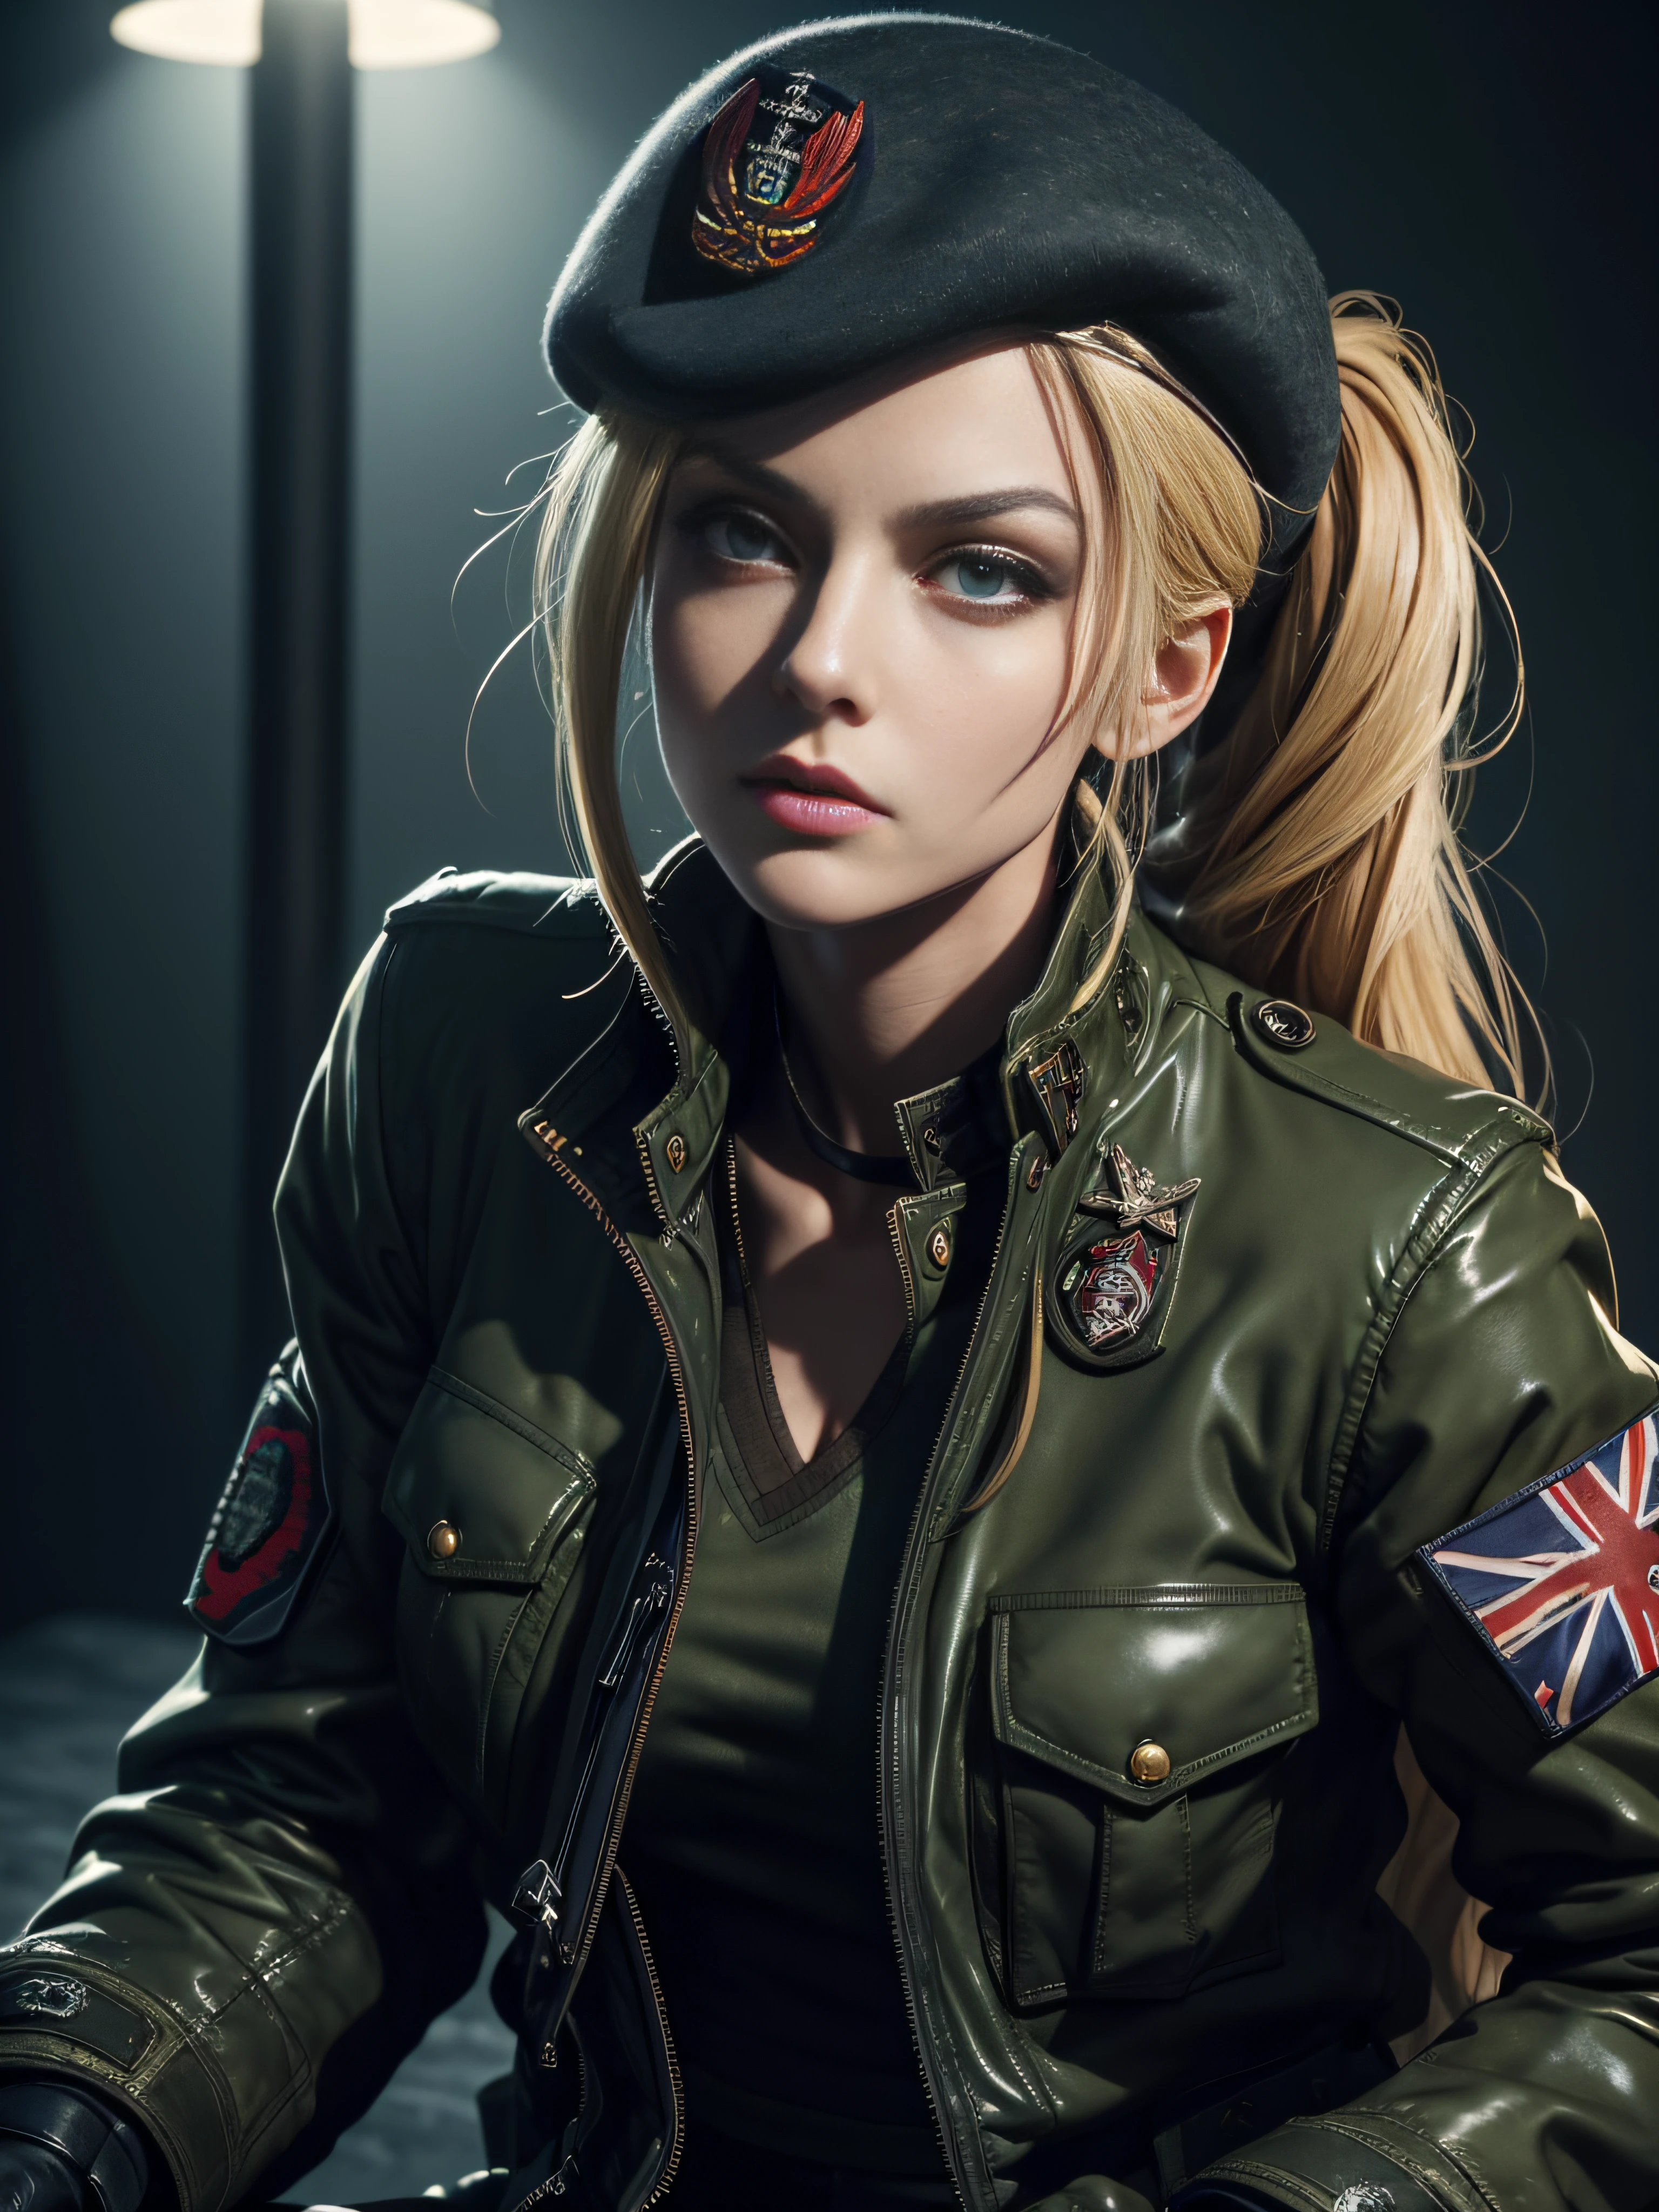 "(exquisitely detailed CG unity 8k wallpaper, masterpiece-quality with stunning realism), (best illumination, best shadow), (best quality), (elegant and demonic style:1.2), Arti modern anime. angled view, heroic pose, closeup full body portrait of stunningly beautiful cammy from street fighter, Masterpiece, best quality, highres, mature Cammy white, twin braids, long hair, blonde hair, antenna hair, beret, (red headwear:1), blue eyes, scar on cheek, green military croptop, green military shorts, red gloves, fingerless gloves, camouflage, (fully clothed:1), abs, depth of field blur effect, night, full zoom, action portrait, photorealistic. cinematic lighting, highly detailed. best quality, 4k, Better hand, perfect anatomy, leaning forward, foreshortening effects, coy flirty sexy expression, foreshortening effect, (piercing eyes:0.8), surrounded by an ominous and dark atmosphere, accentuated by dramatic and striking lighting, imbued with a sense of surreal fantasy". wearing laced military boots:1.5), (resting in MI6 headquarters:1) (wearing a British Military jacket:1.5) (mature:0.5)